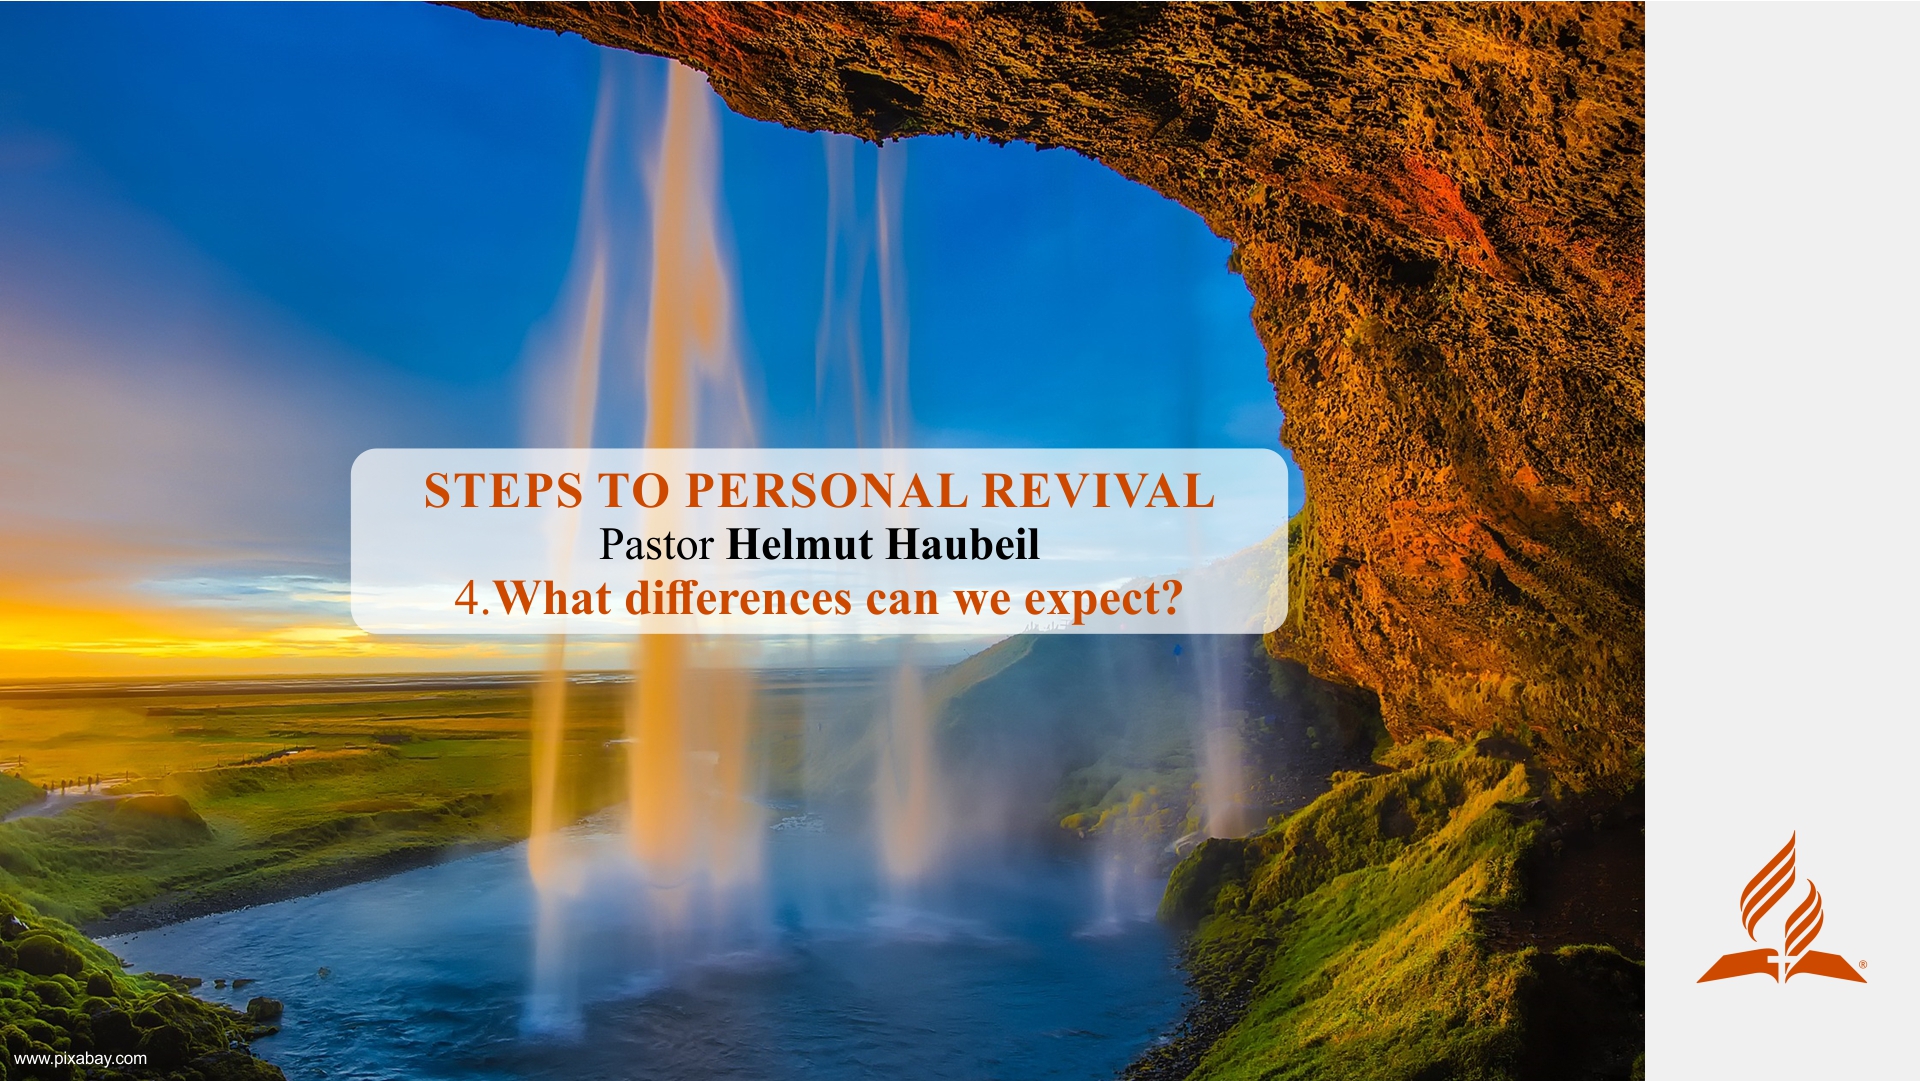 4.What differences can we expect? – STEPS TO PERSONAL REVIVAL | Pastor Helmut Haubeil